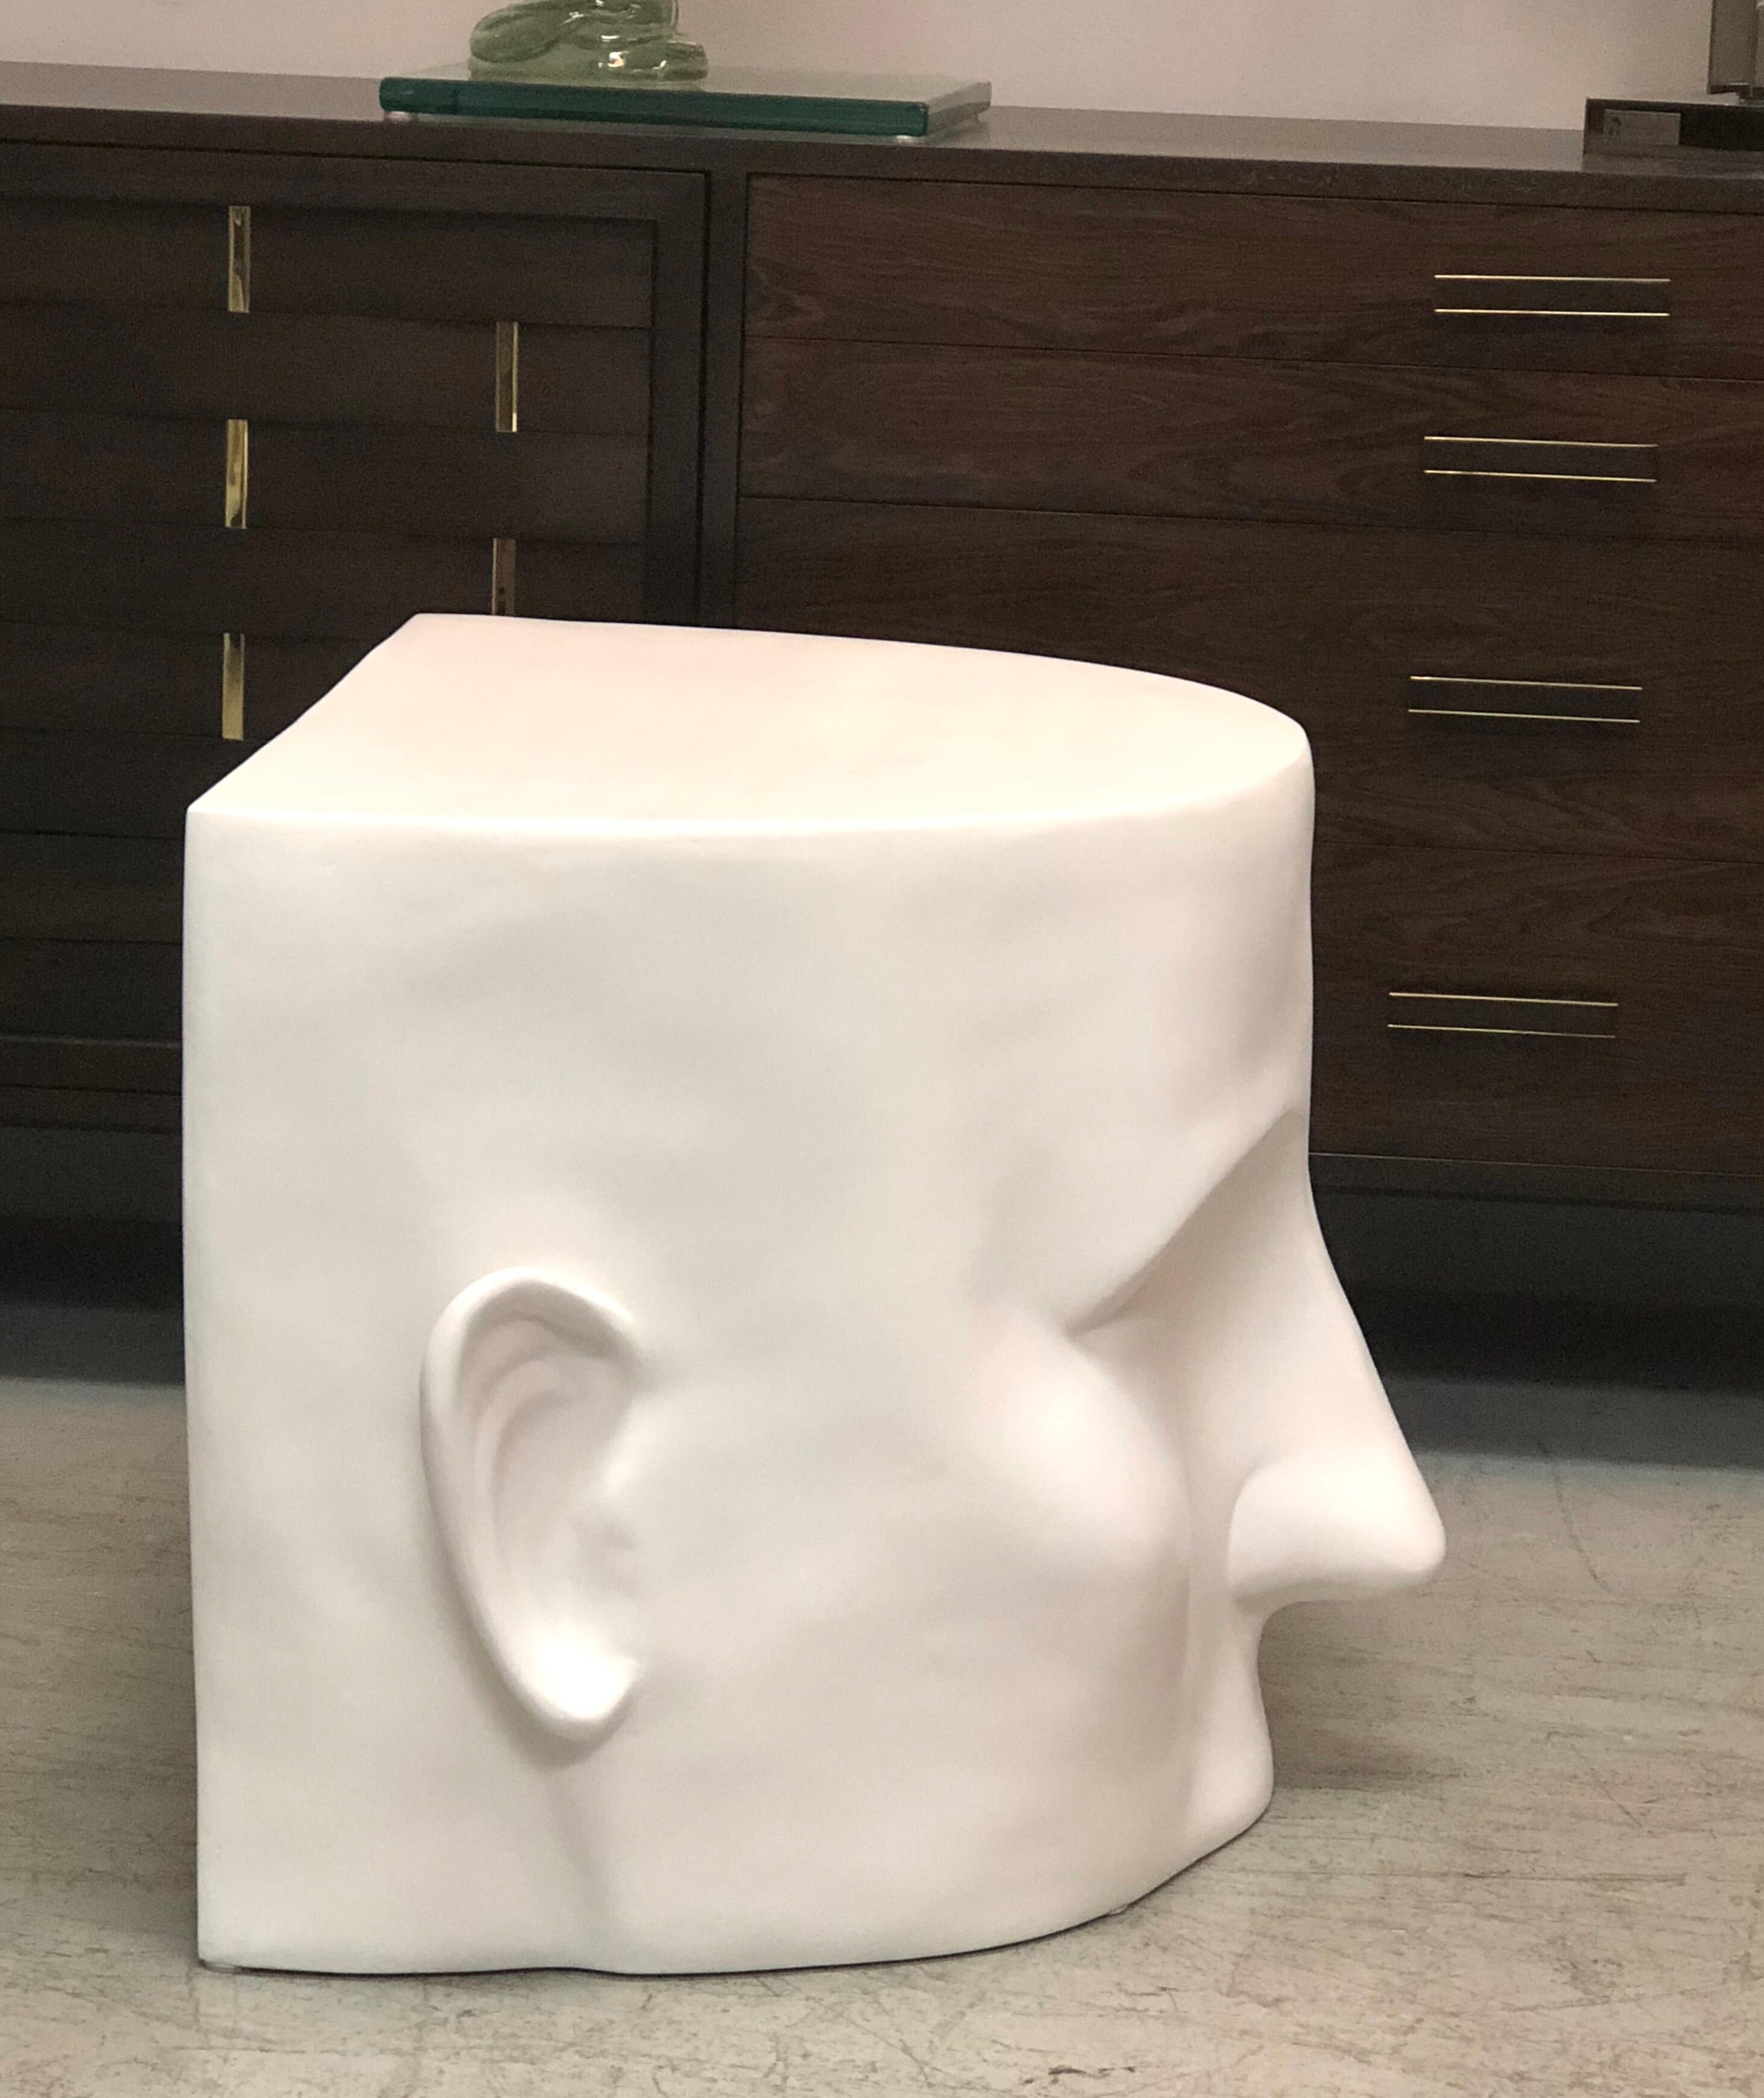 American Sculptural Head Architectural Table Bench, 1980s